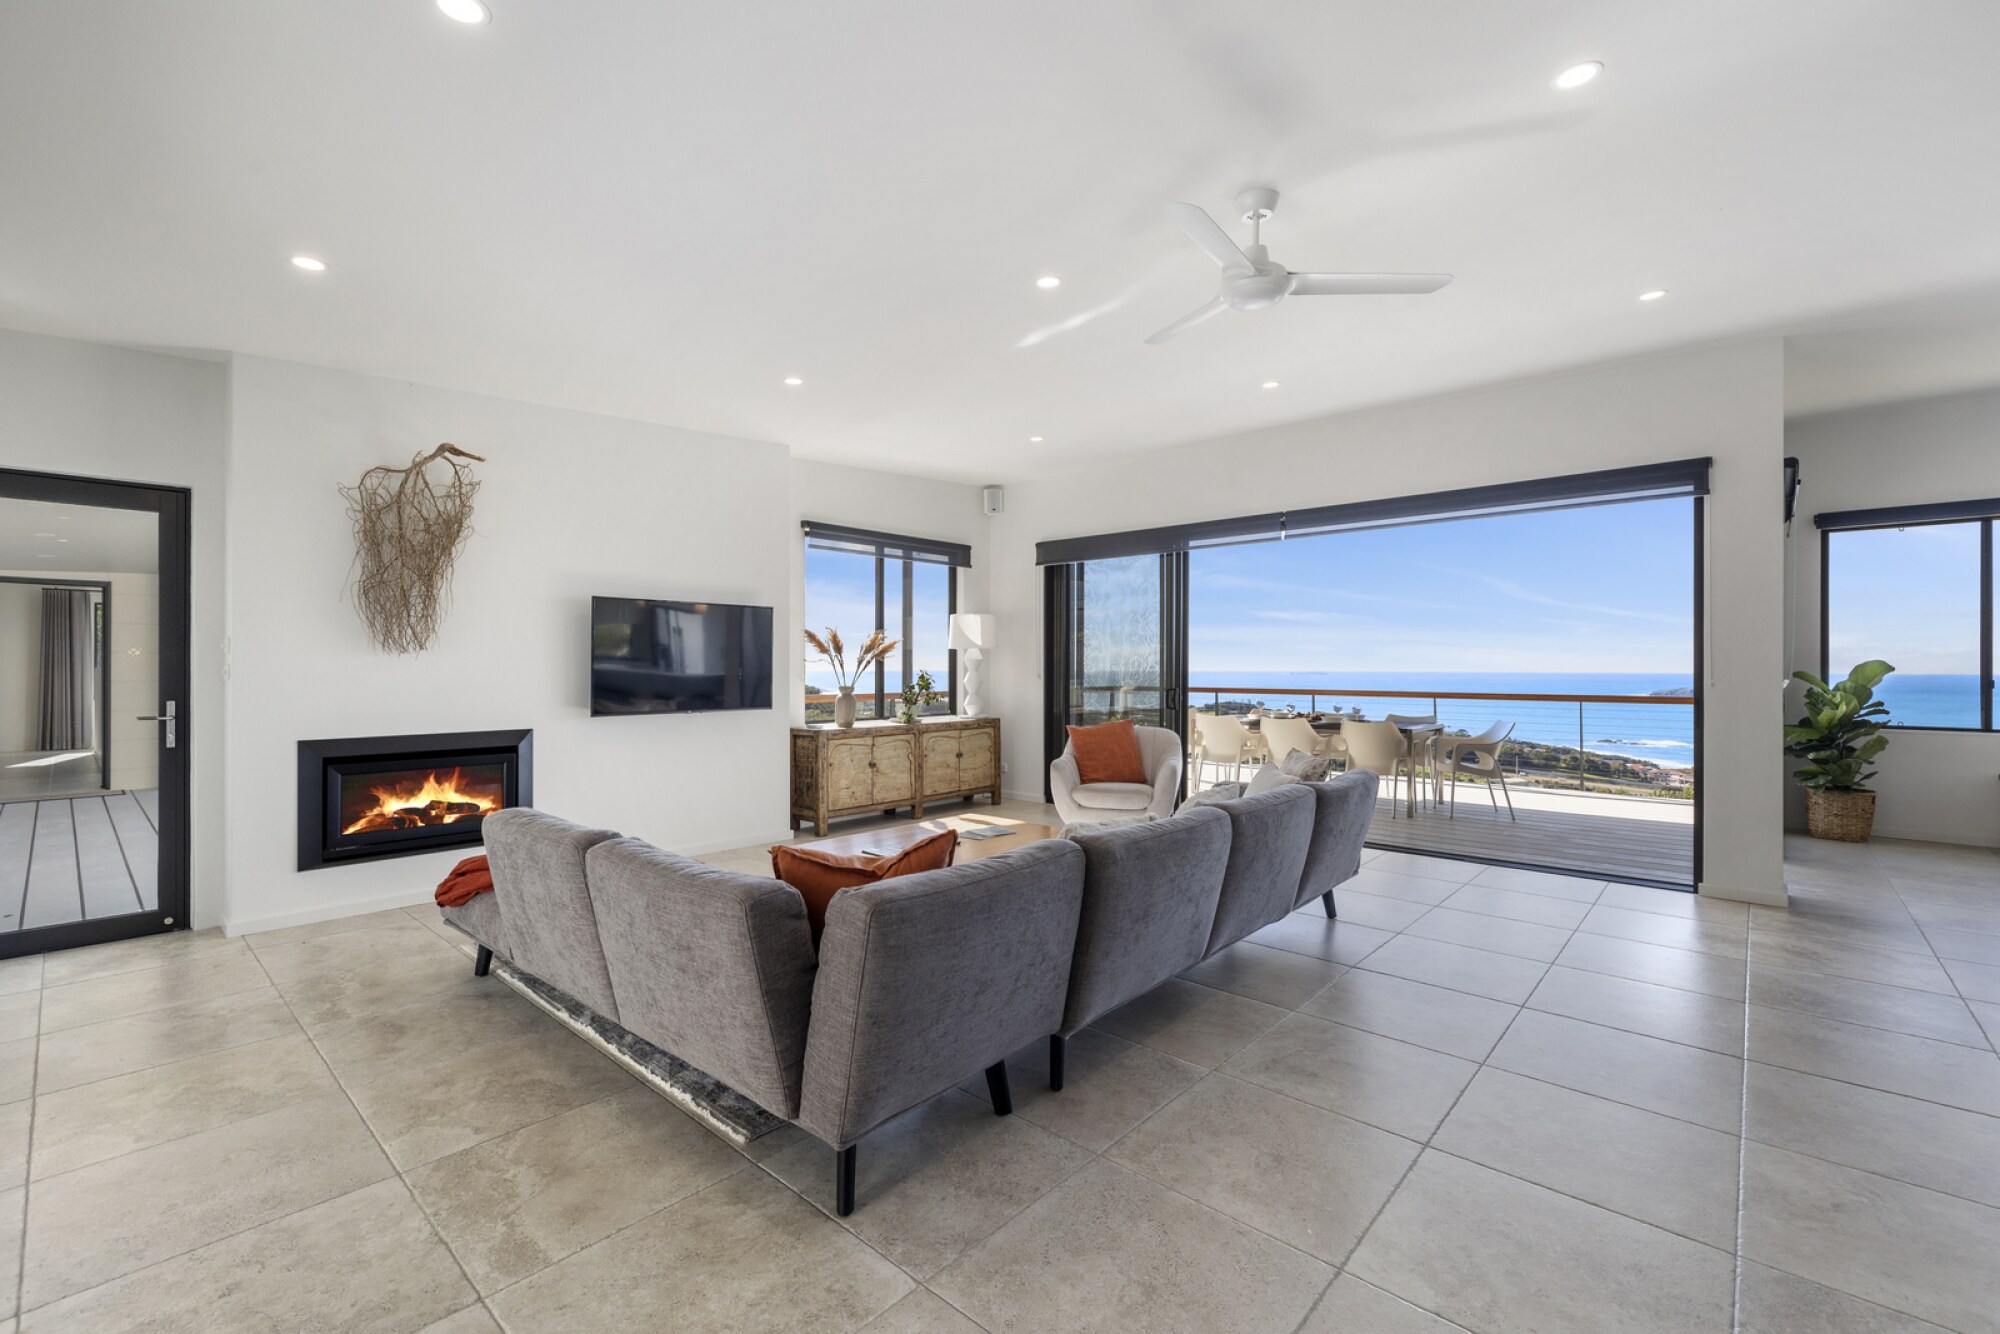 Lounge area with gas fireplace, deck and ocean views